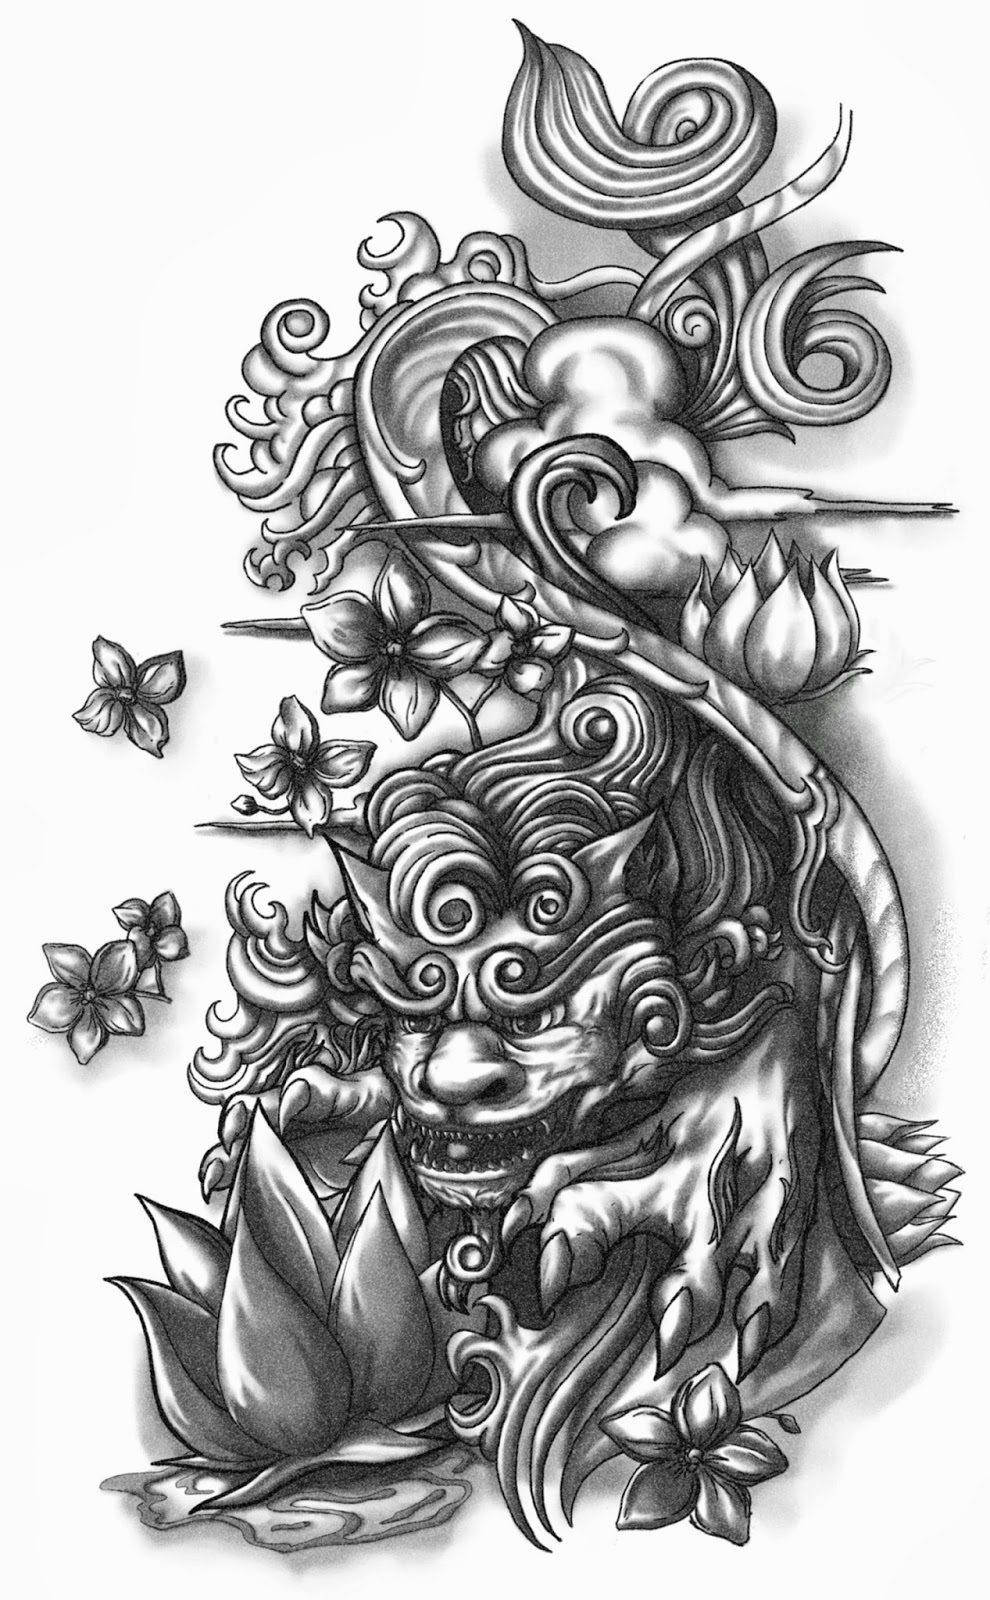 Tattoo sleeve designs black and white drawings, tattoo sleeve designs